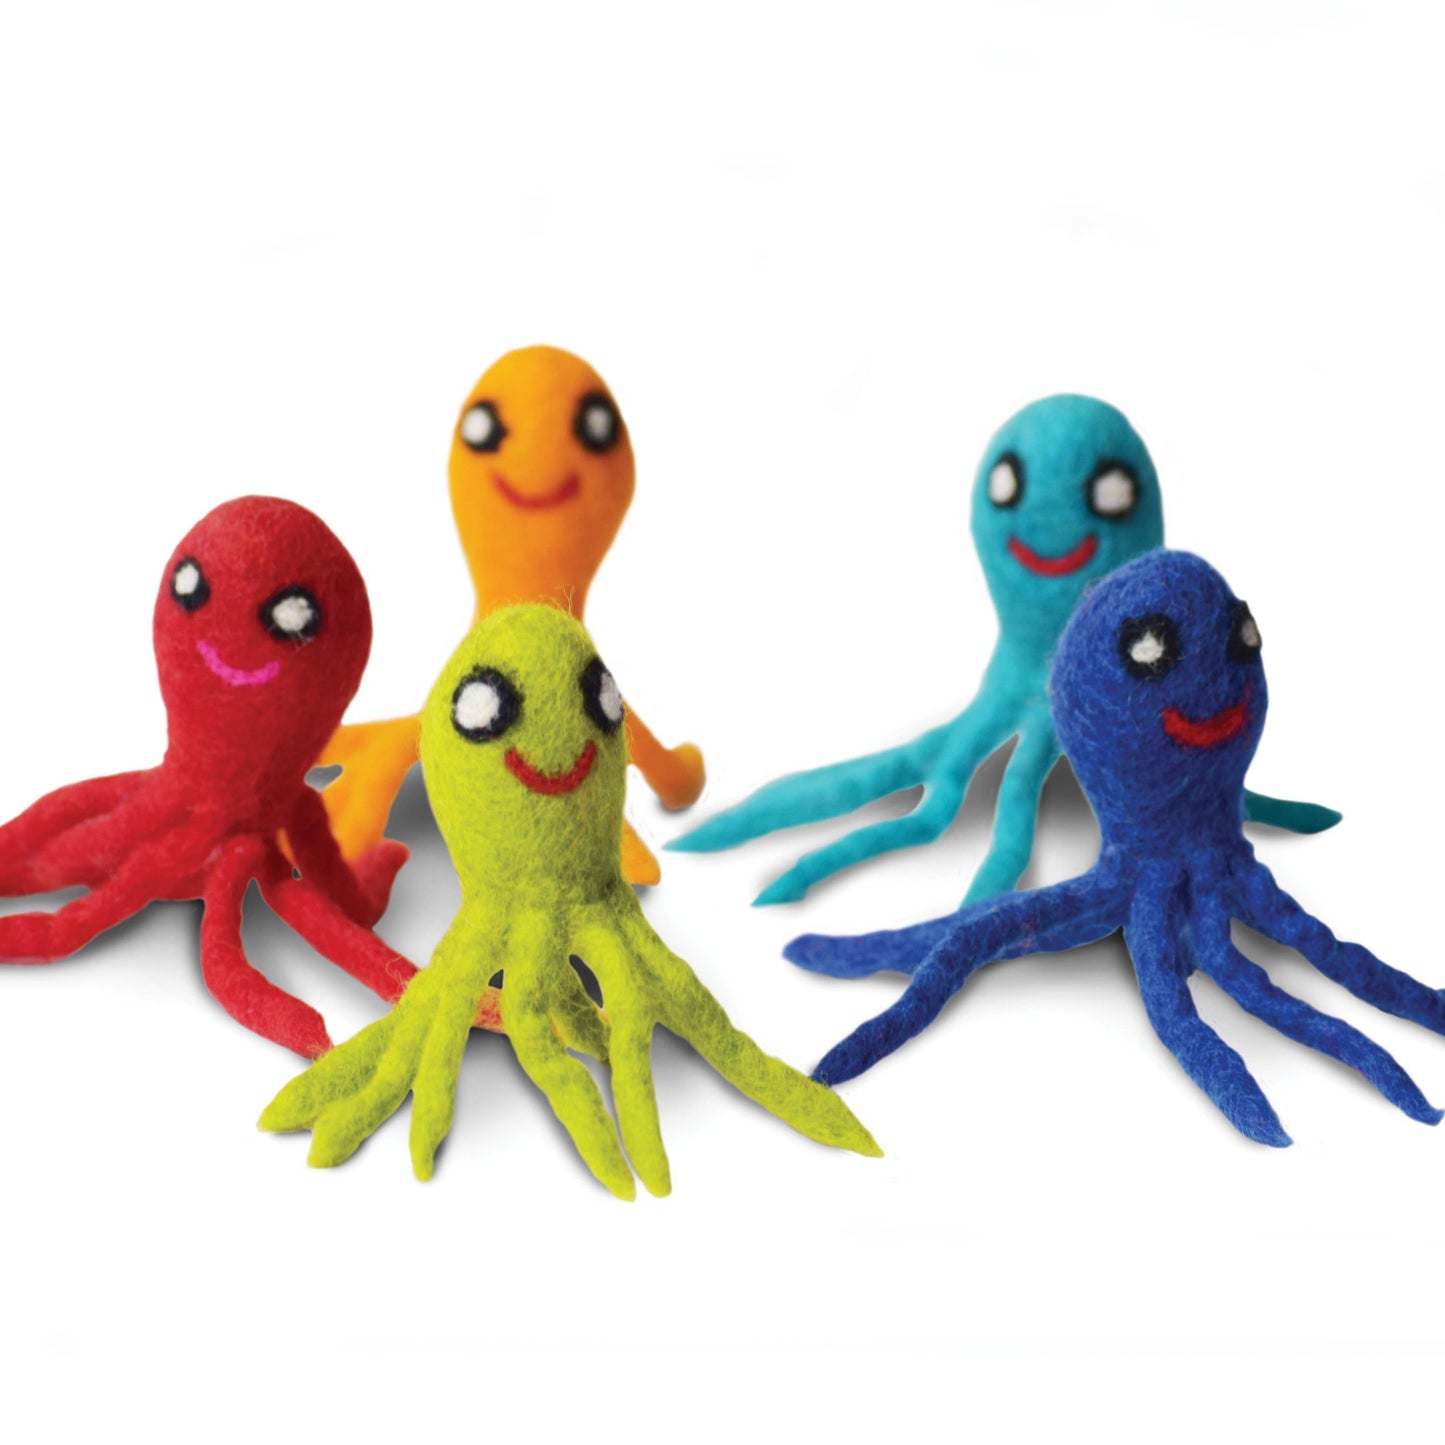 Octopus Wool Cat Toy - Pack of 2